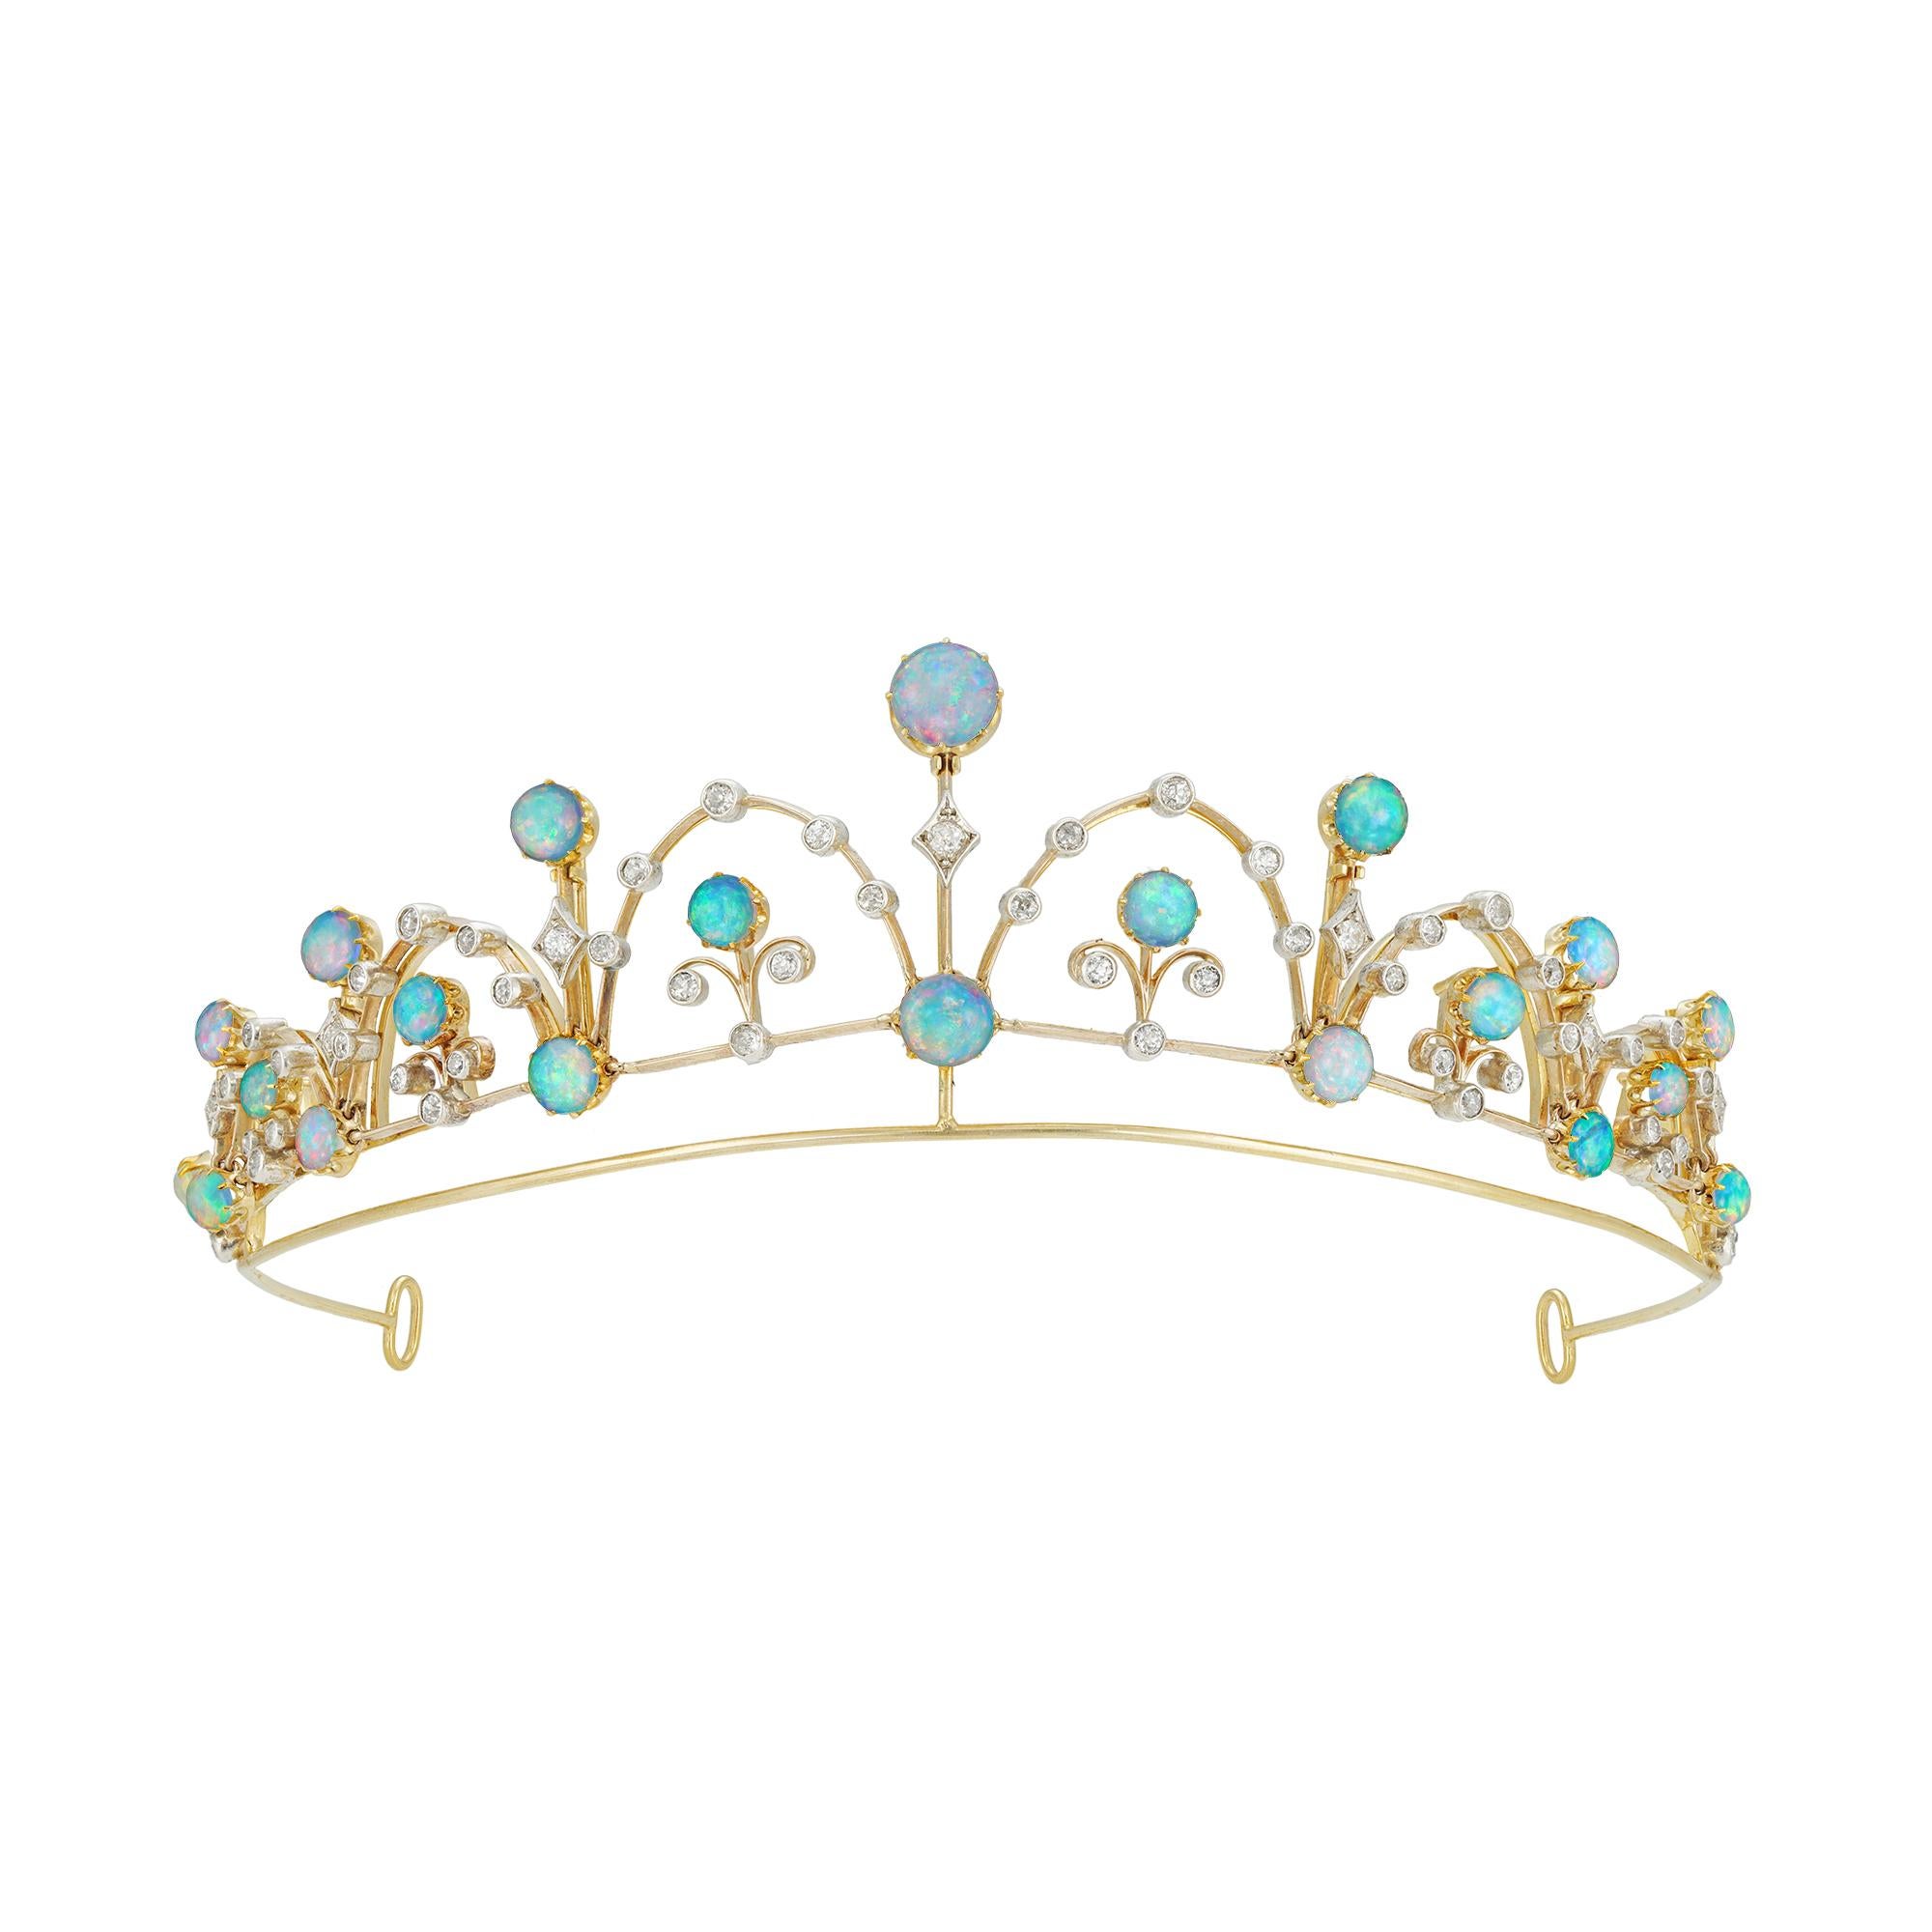 A late Victorian opal and diamond tiara/necklace, consisting of seven knife-edge gold bars graduating from the centre, each set with two round cabochon-cut opals and an old-cut diamond in-between, the bars connected with six diamond-set arches each